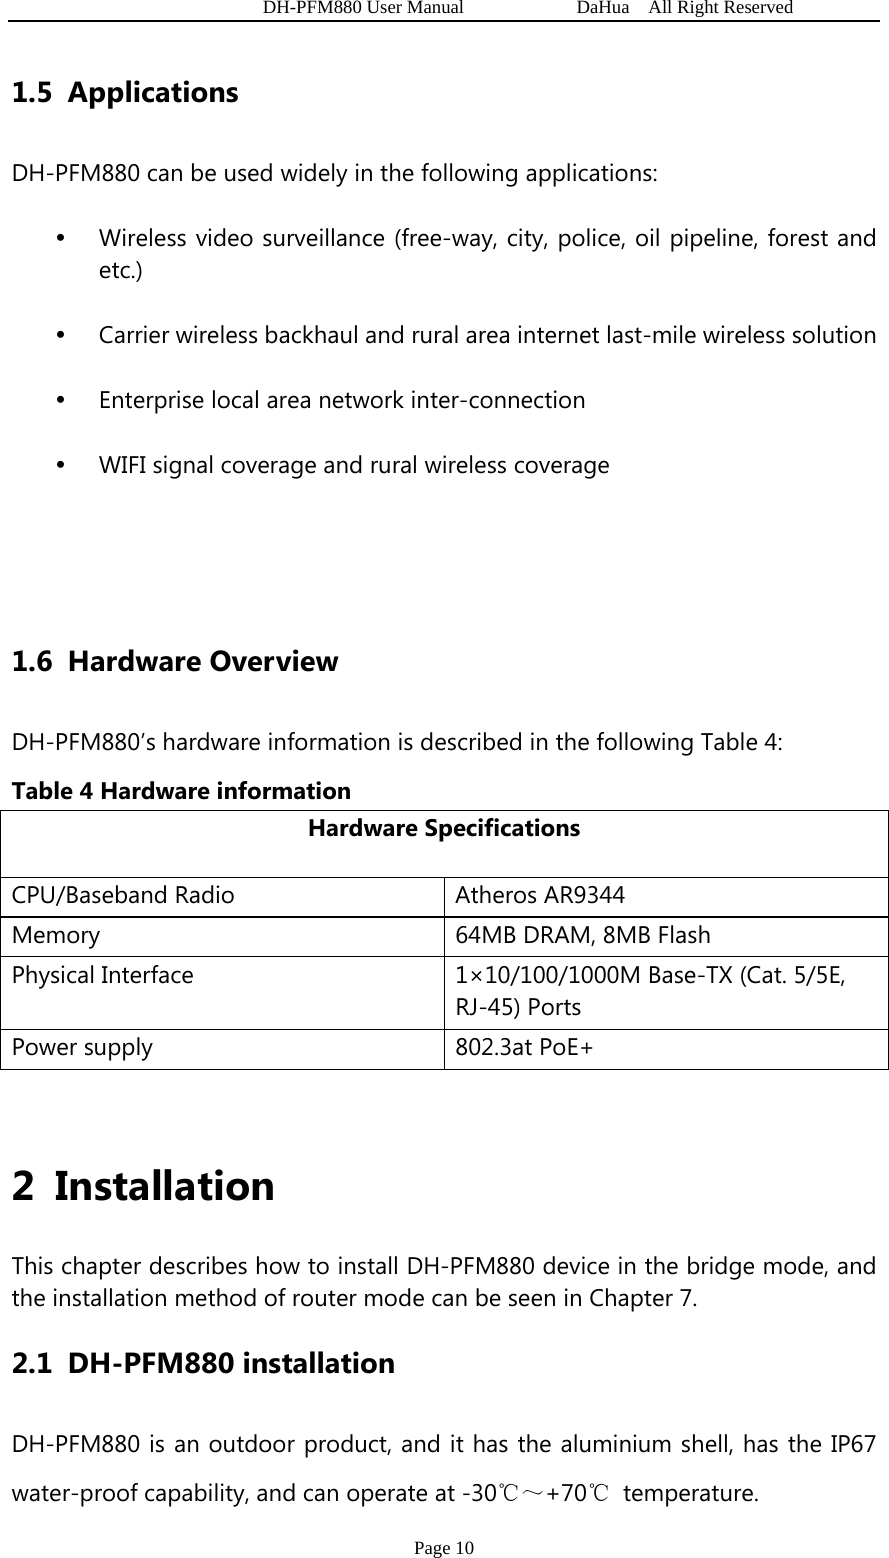   DH-PFM880 User Manual            DaHua  All Right Reserved Page 10 1.5 Applications DH-PFM880 can be used widely in the following applications: y Wireless video surveillance (free-way, city, police, oil pipeline, forest and etc.) y Carrier wireless backhaul and rural area internet last-mile wireless solution y Enterprise local area network inter-connection y WIFI signal coverage and rural wireless coverage   1.6 Hardware Overview DH-PFM880’s hardware information is described in the following Table 4:   Table 4 Hardware information Hardware Specifications CPU/Baseband Radio  Atheros AR9344 Memory  64MB DRAM, 8MB Flash Physical Interface  1×10/100/1000M Base-TX (Cat. 5/5E, RJ-45) Ports Power supply  802.3at PoE+  2 Installation This chapter describes how to install DH-PFM880 device in the bridge mode, and the installation method of router mode can be seen in Chapter 7. 2.1 DH-PFM880 installation DH-PFM880 is an outdoor product, and it has the aluminium shell, has the IP67 water-proof capability, and can operate at -30℃～+70℃ temperature. 